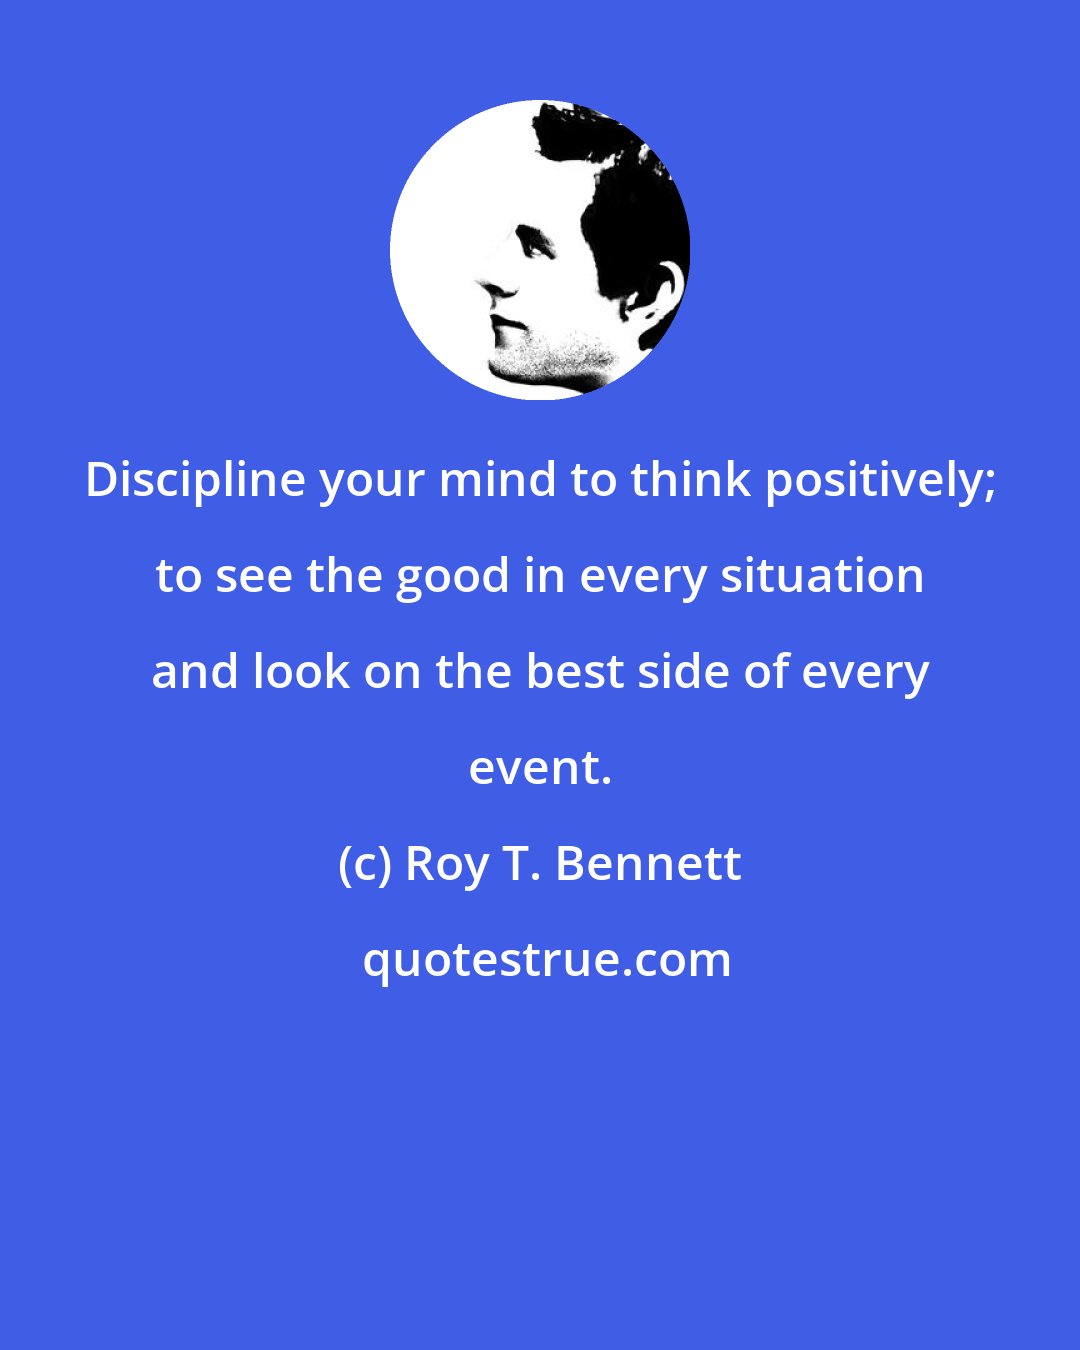 Roy T. Bennett: Discipline your mind to think positively; to see the good in every situation and look on the best side of every event.